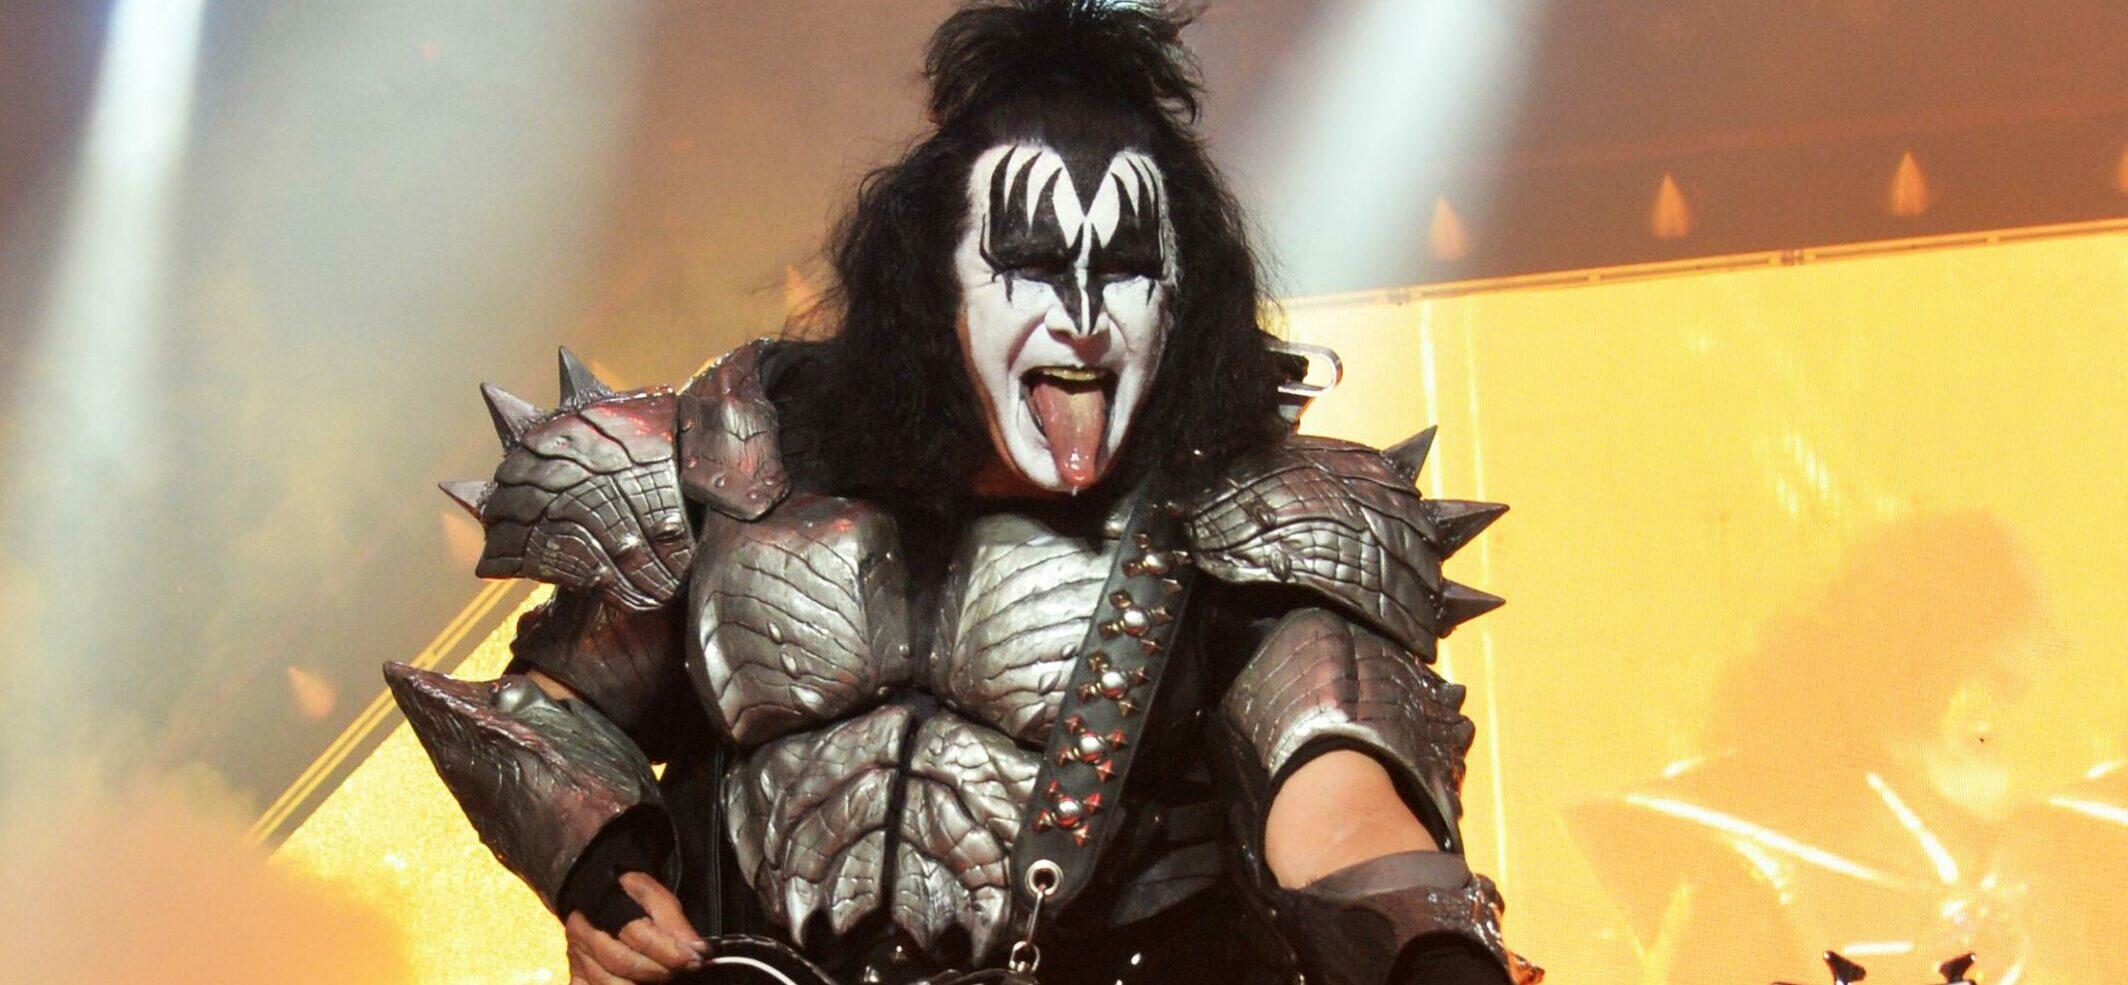 Gene Simmons Tests Positive For COVID-19, Band Postpones Tour!